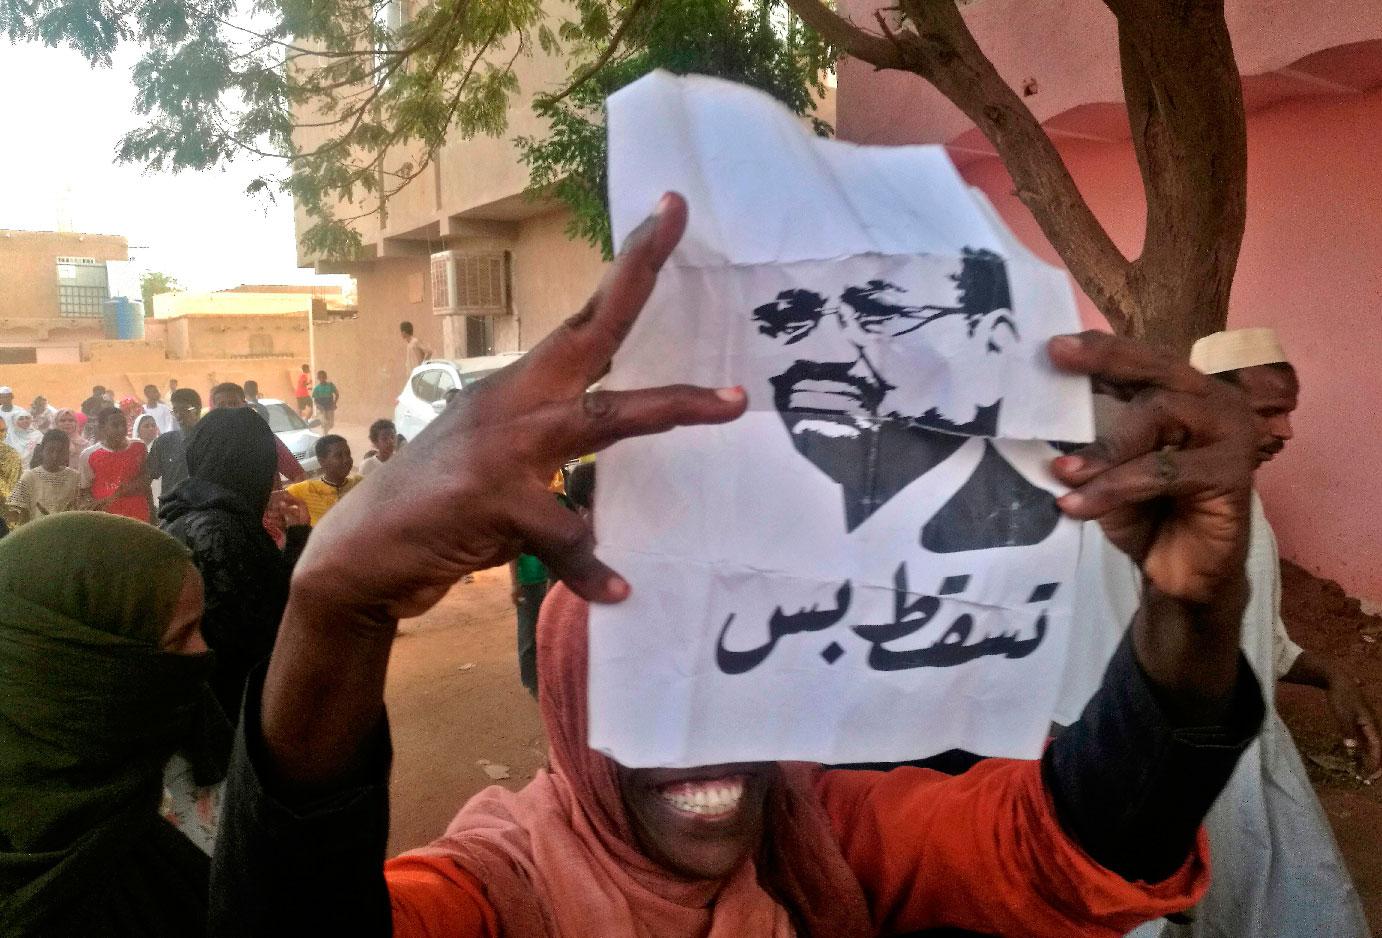 A Sudanese protester carries a portrait of President Omar al-Bashir with Arabic writing that reads "down and that is all" during an anti-government demonstration east of the capital Khartoum on February 9, 2019.